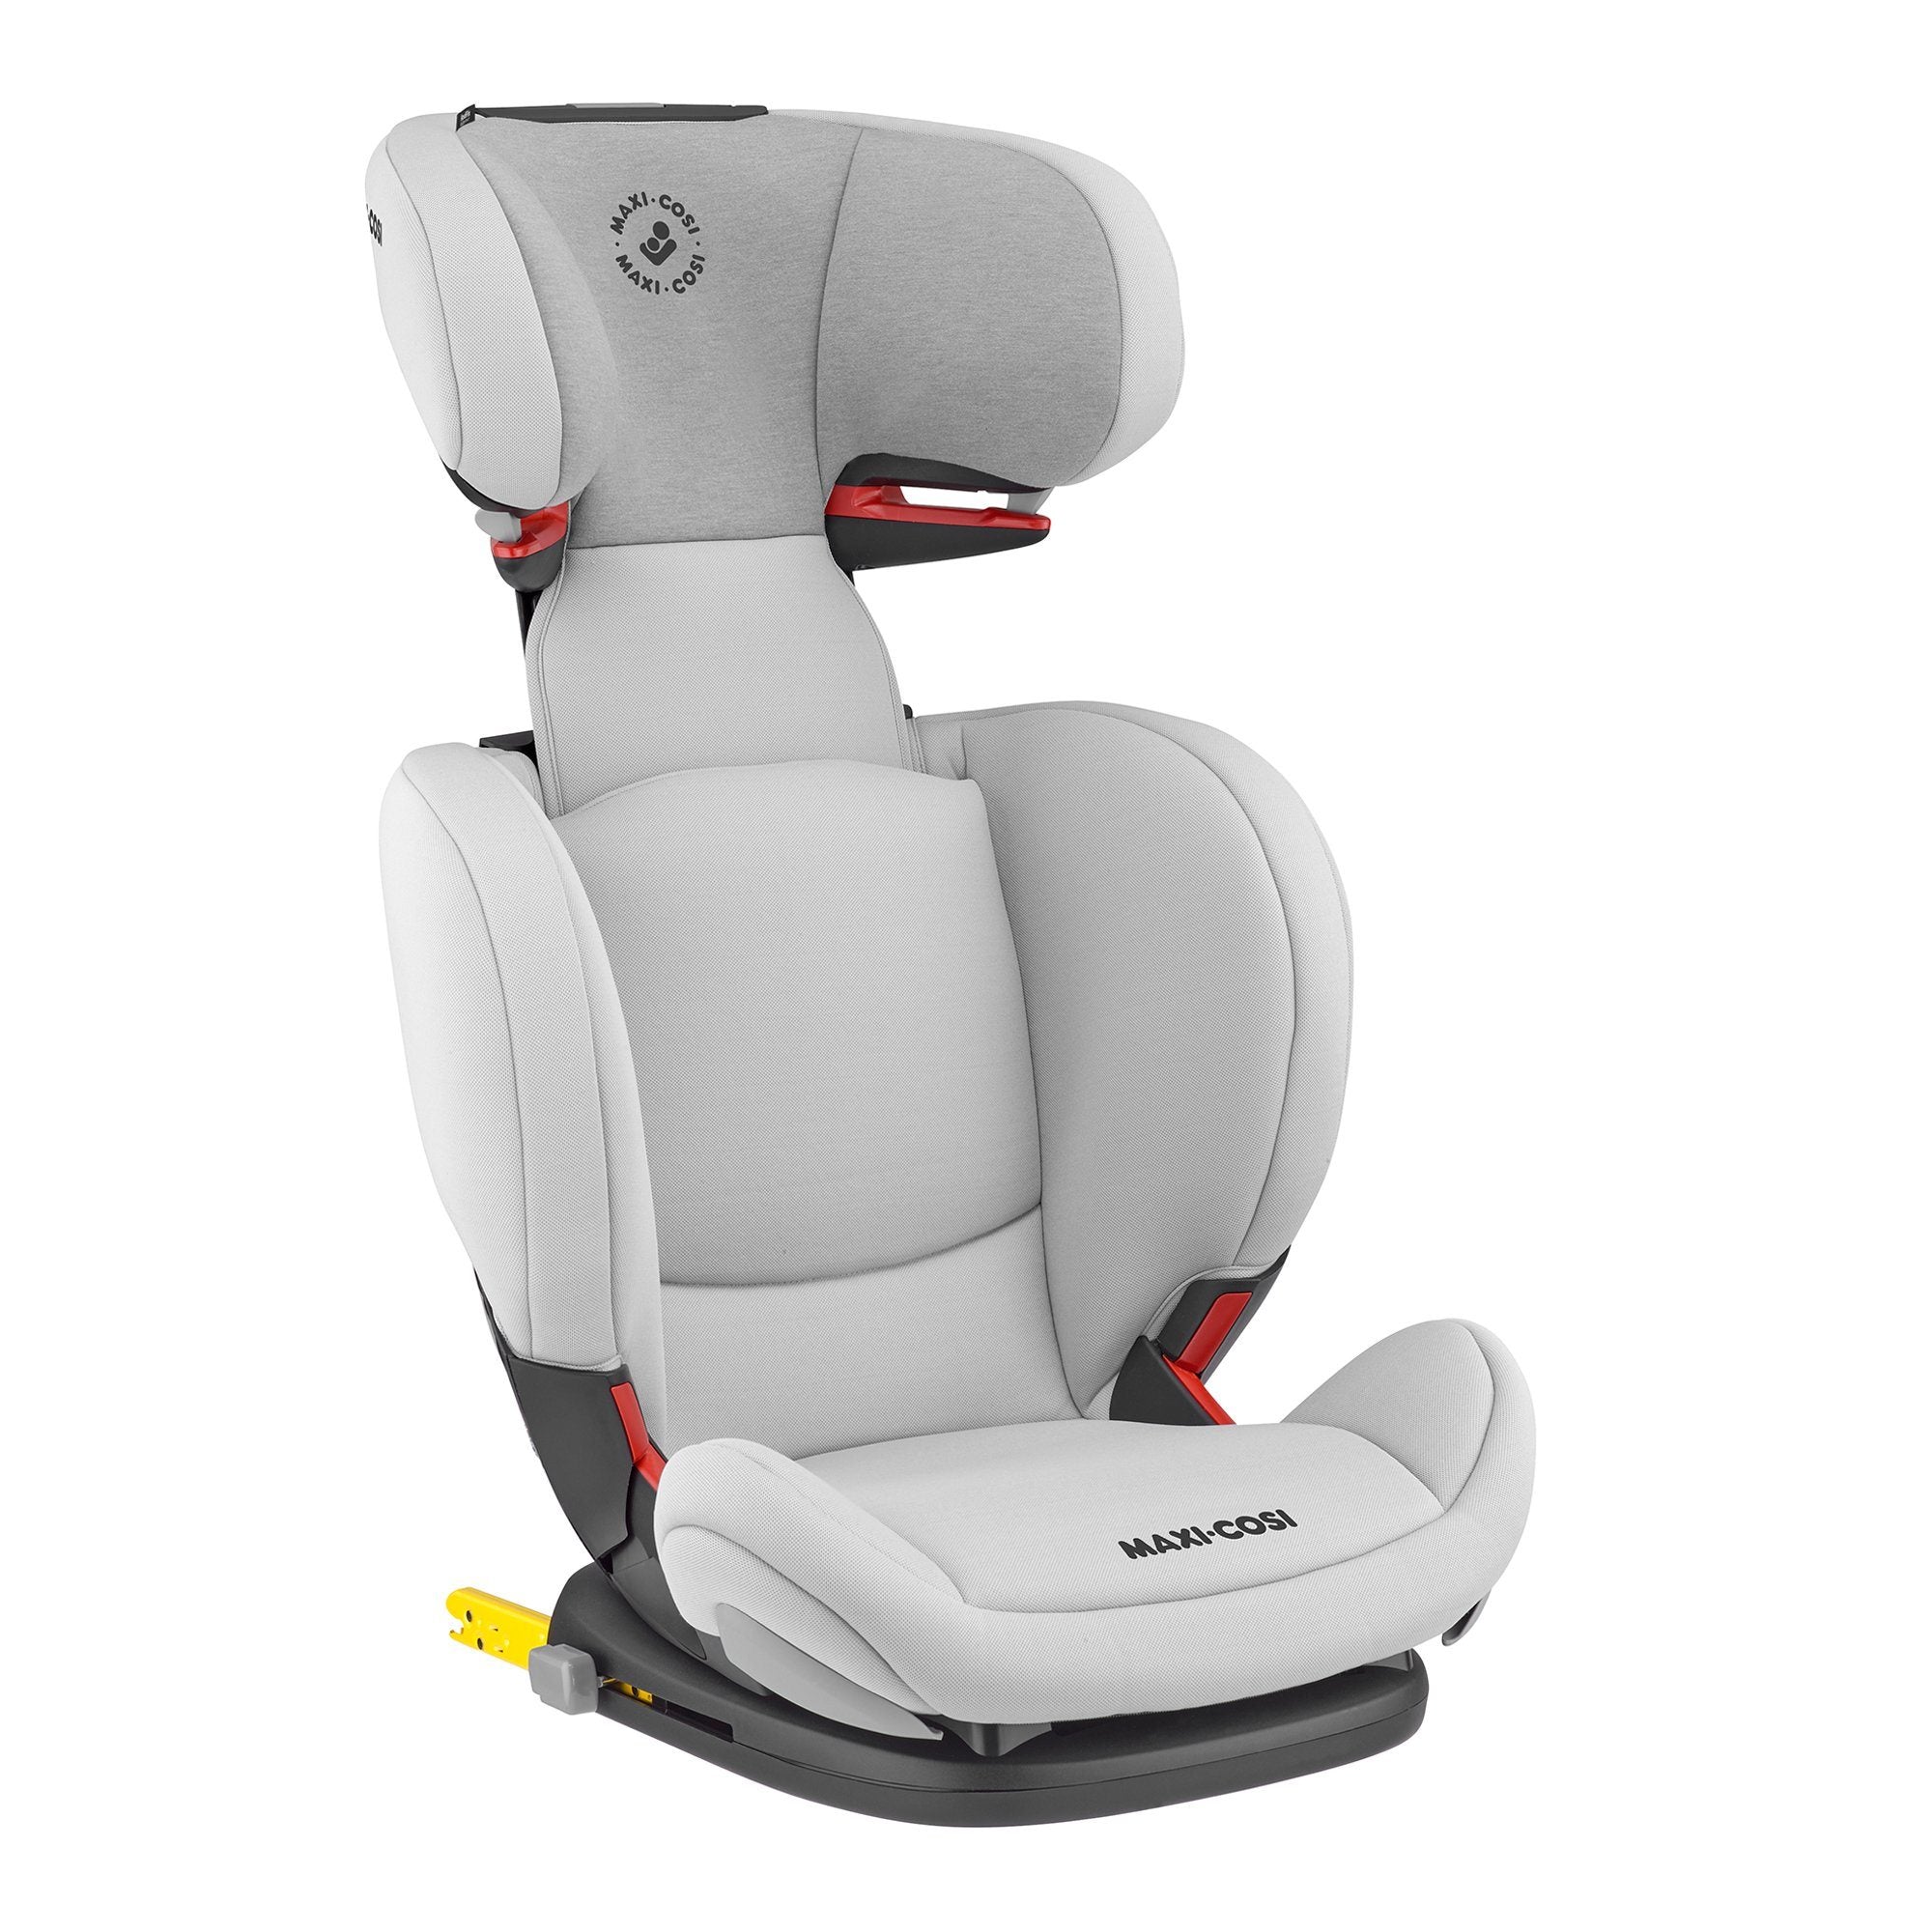 rem vice versa Reclame Maxi-Cosi Rodi AirProtect high-back booster - Authentic Grey | Baby  Products for Parents